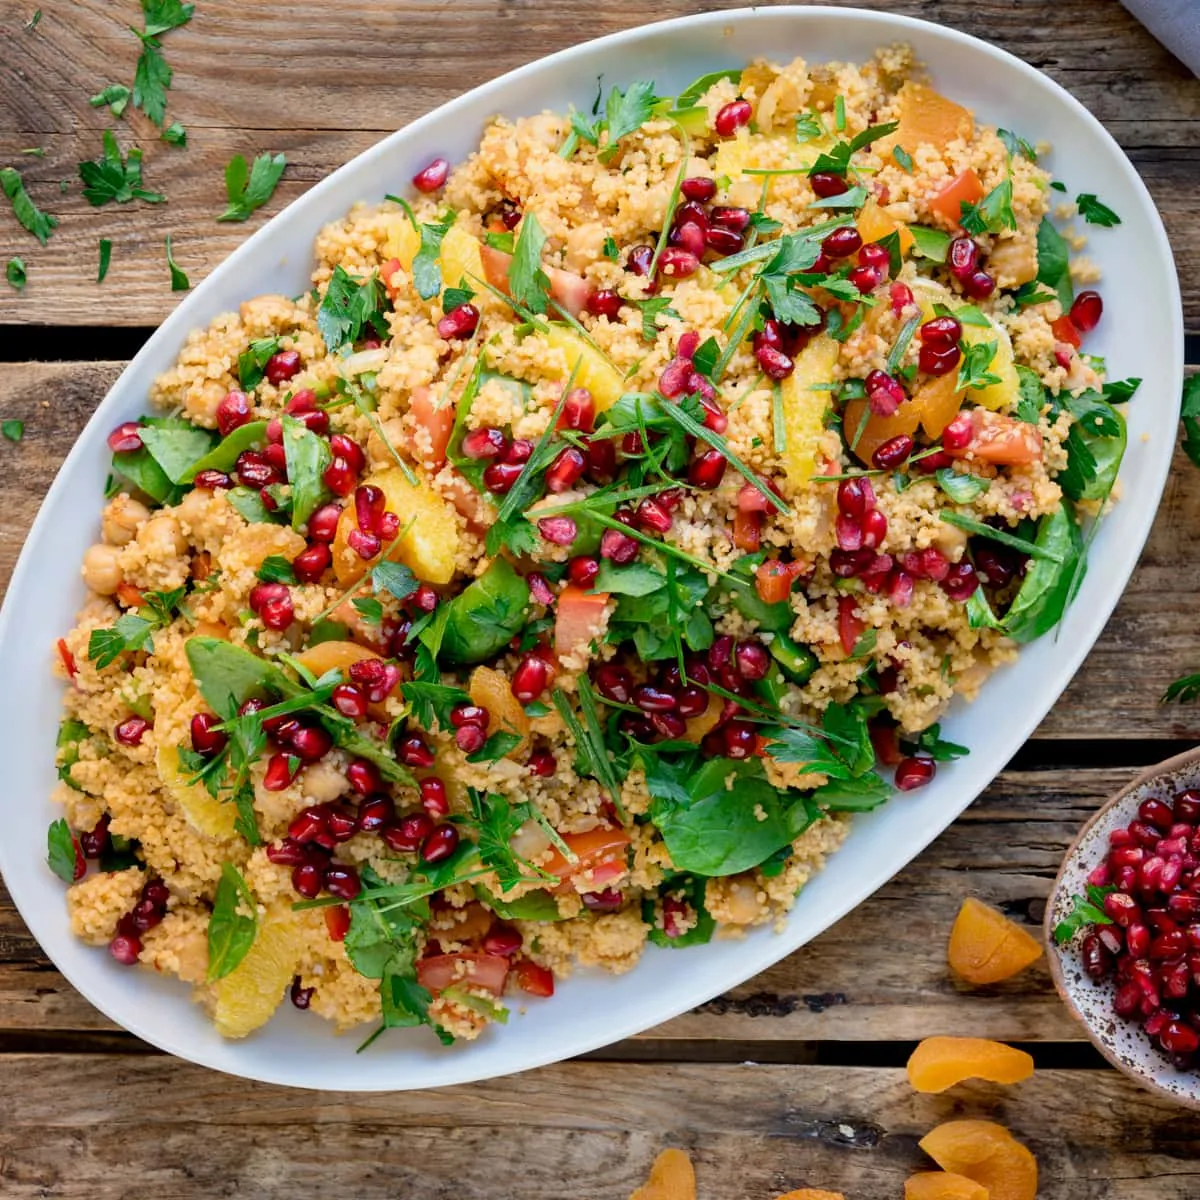 Overhead square image of a large oval white plate filled with Moroccan style couscous with oranges and pomegranate. The plate is on a wooden table, next to a dish of pomegranate. There are chopped dried apricots and fresh herbs scattered around.